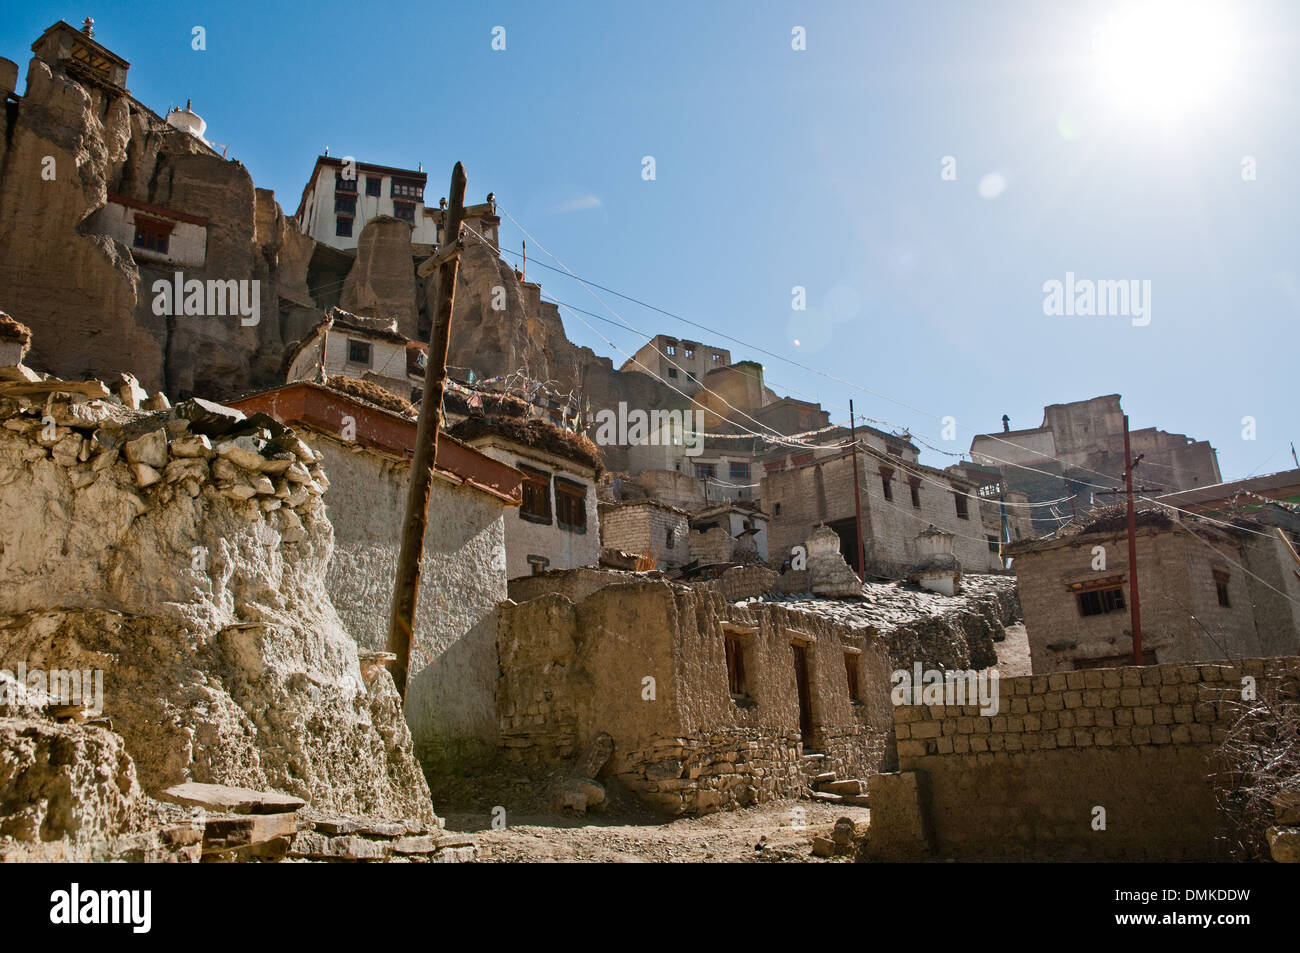 The beautiful valley of Leh in Ladakh, India. Stock Photo